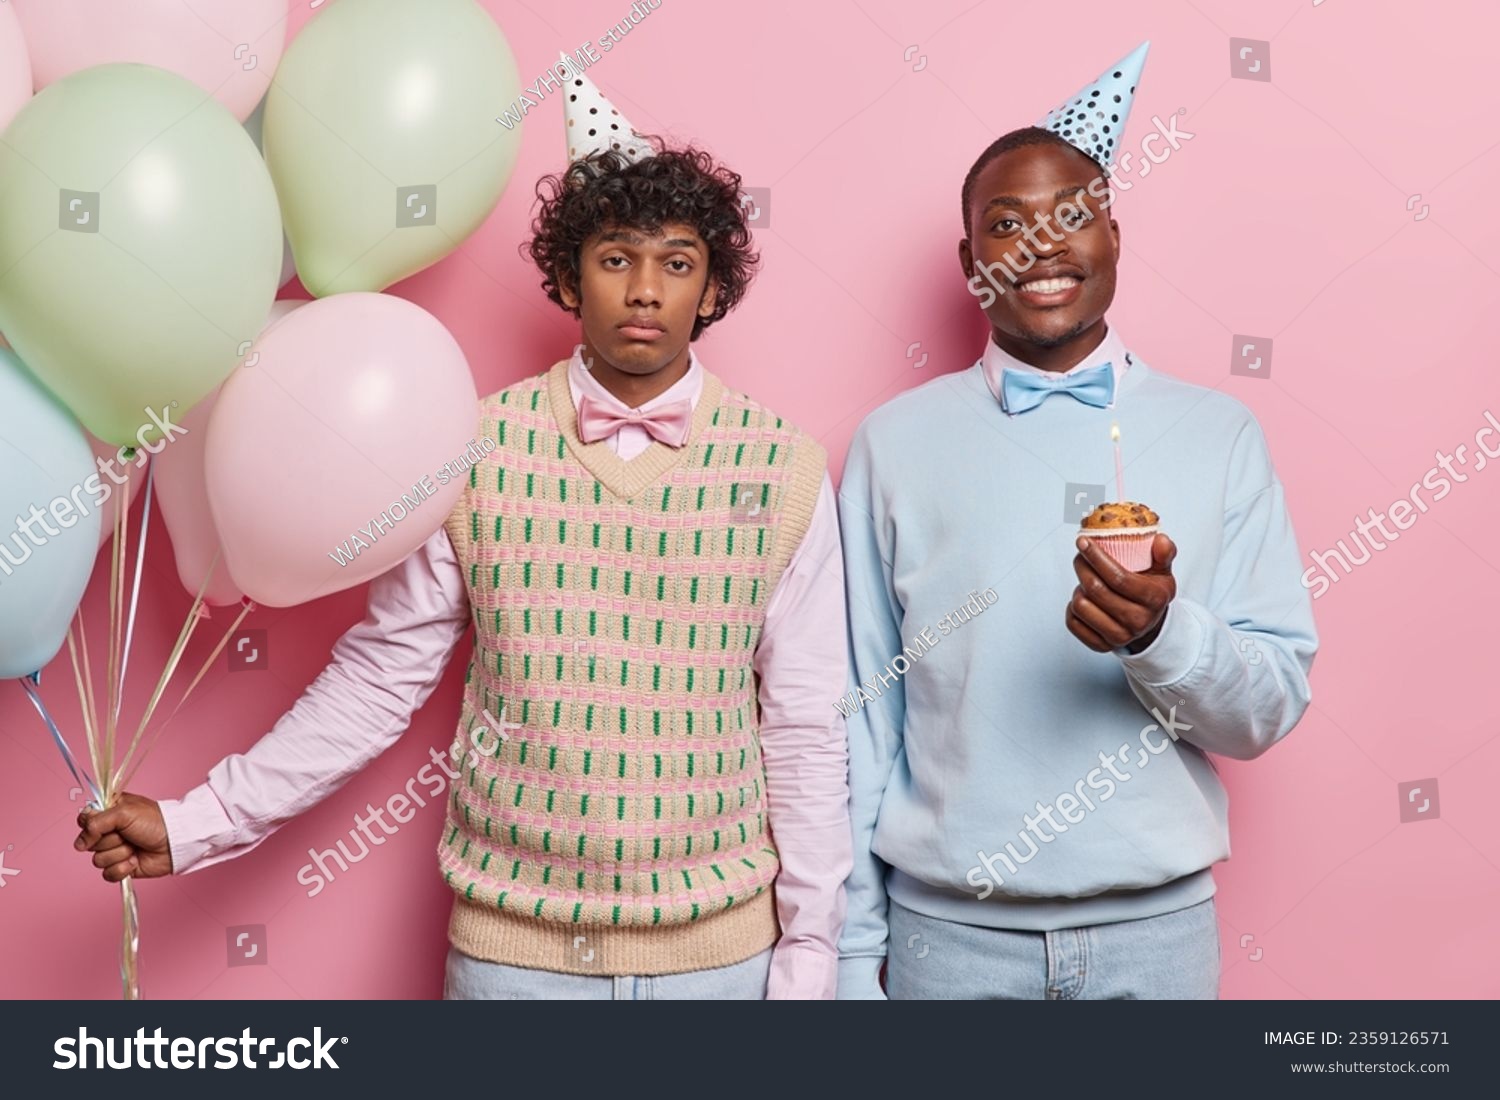 Horizontal shot of curly haired Hindu man and black man dressed in festive clothing holds cupcake with candle holds bunch of colorful balloons celebrates special occasion isolated over pink background #2359126571